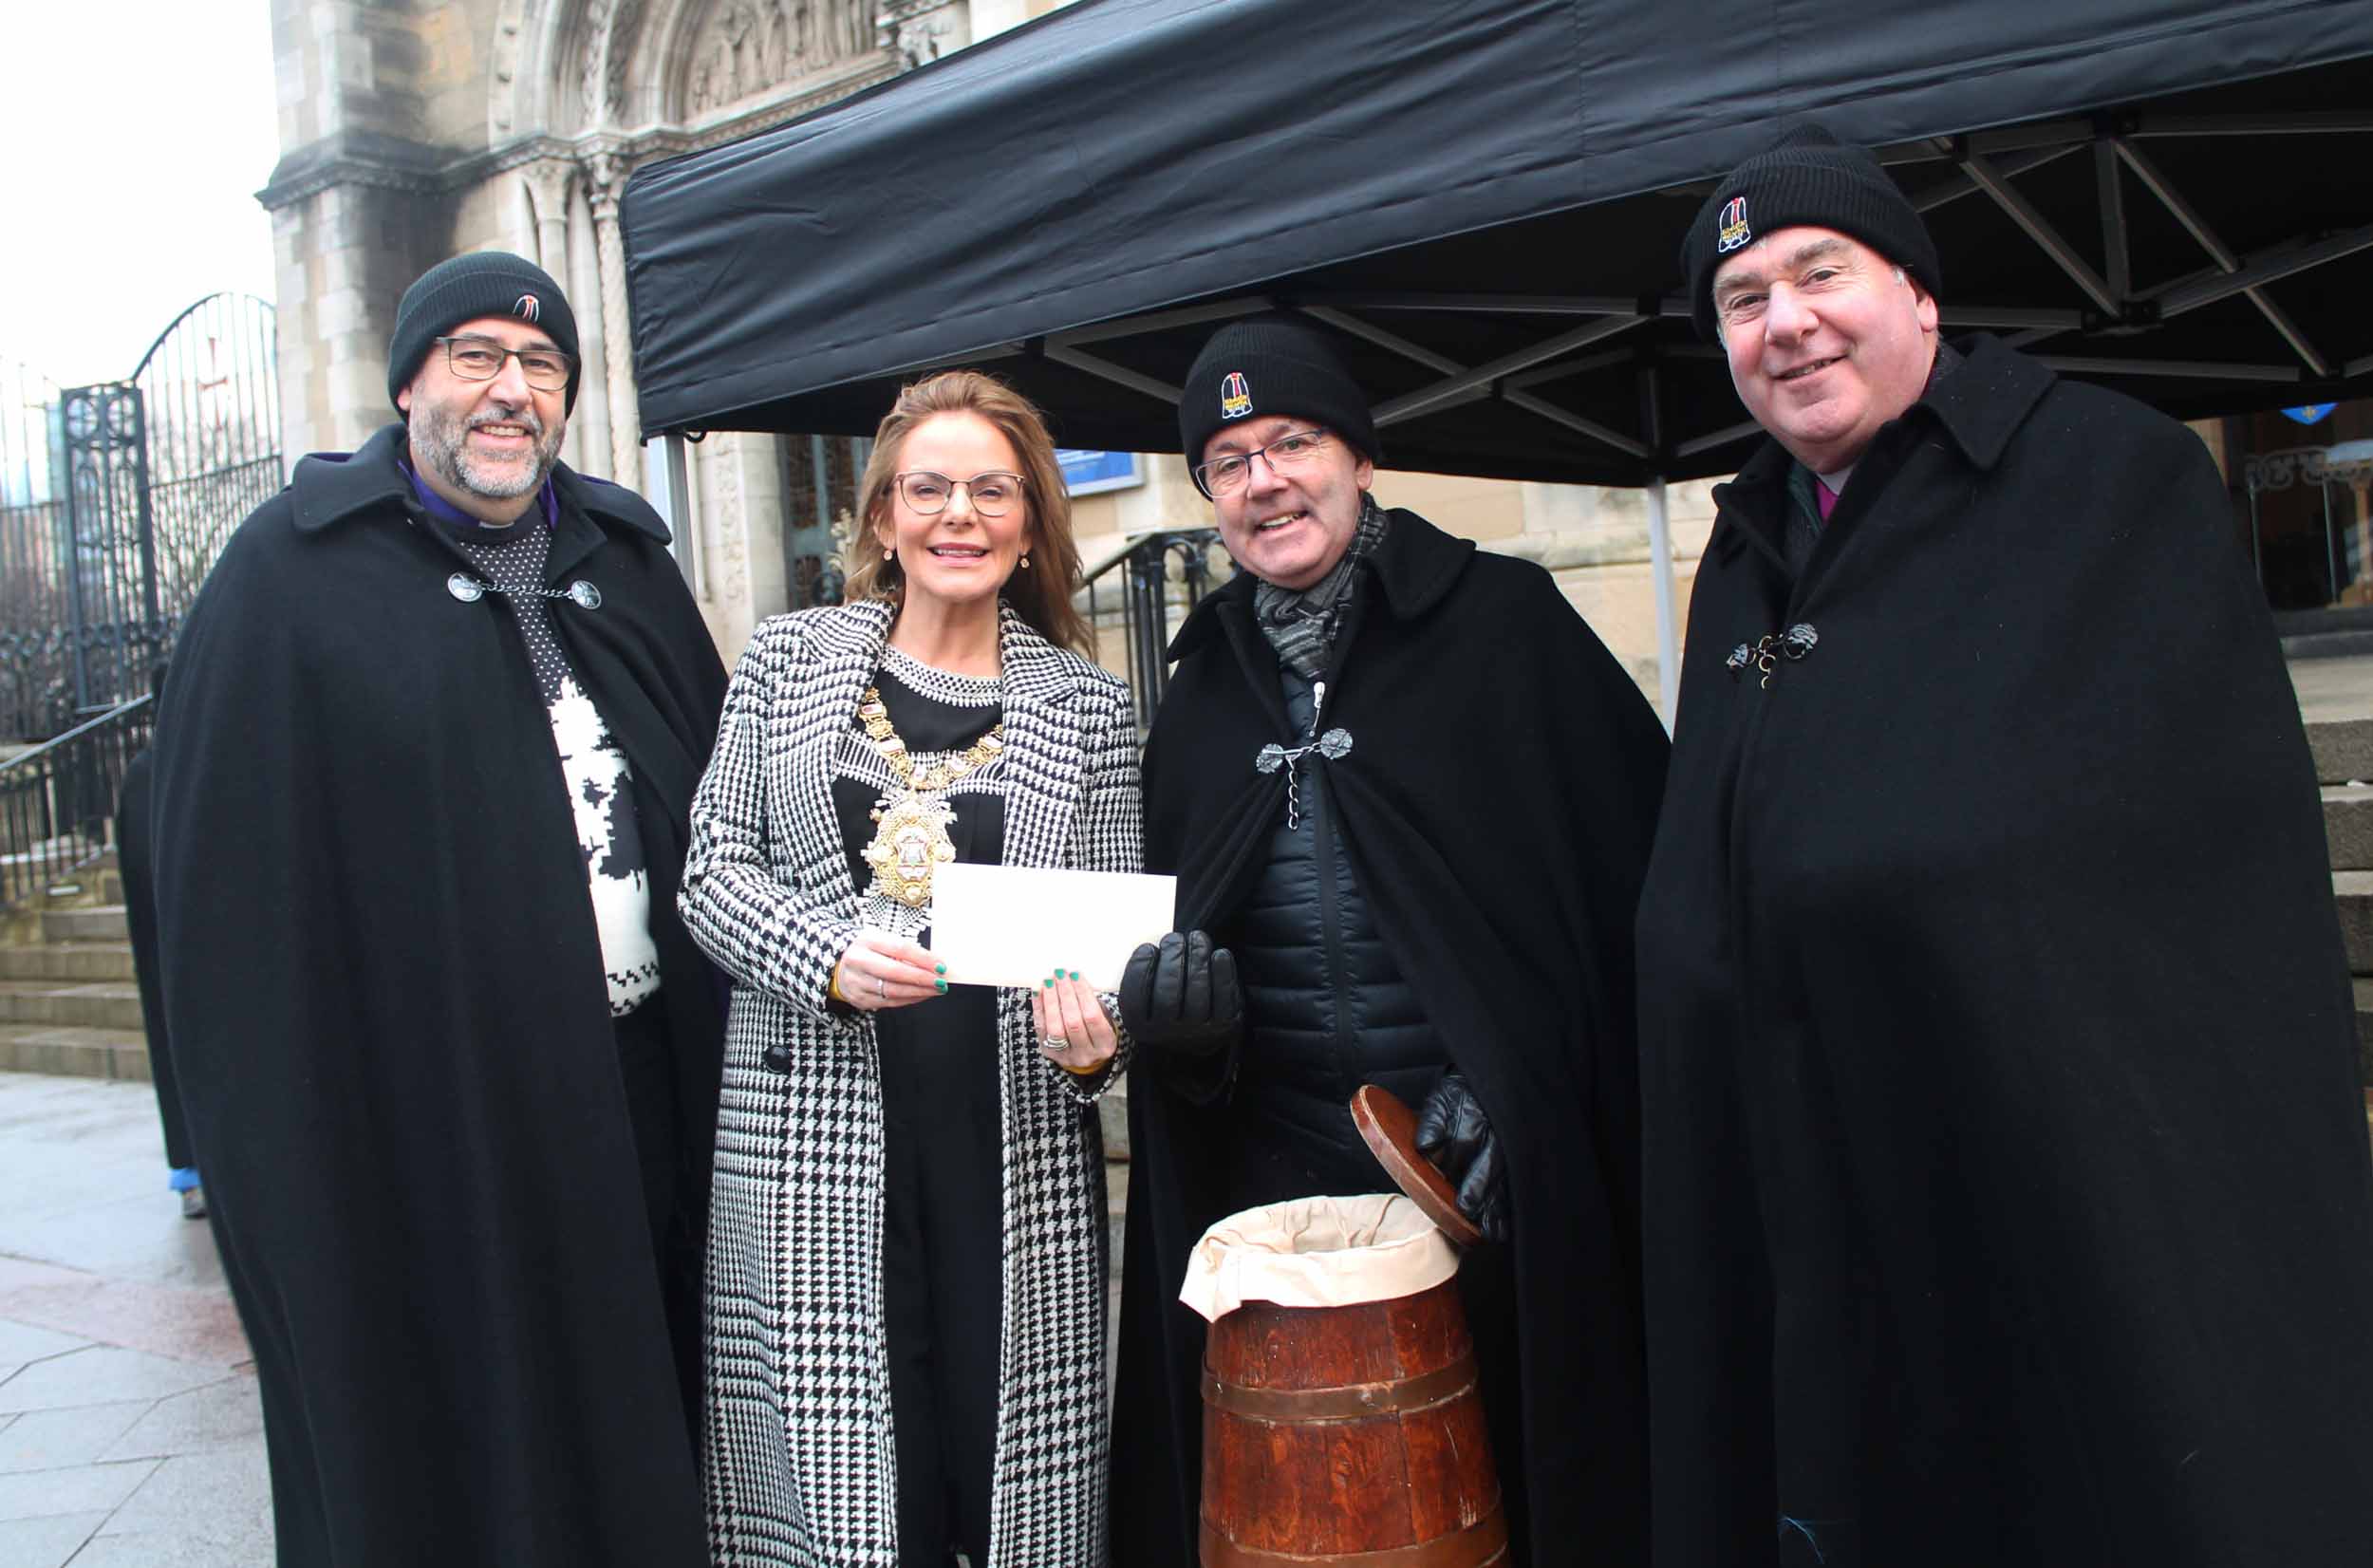 Belfast's Lord Mayor, Councillor Christina Black, second left,  is pictured with, from left, the Rt Rev George Davison, Bishop of Connor; Black Santa, the Very Rev Stephen Forde, Dean of Belfast; and the Rt Rev David McClay, Bishop of Down and Dromore.